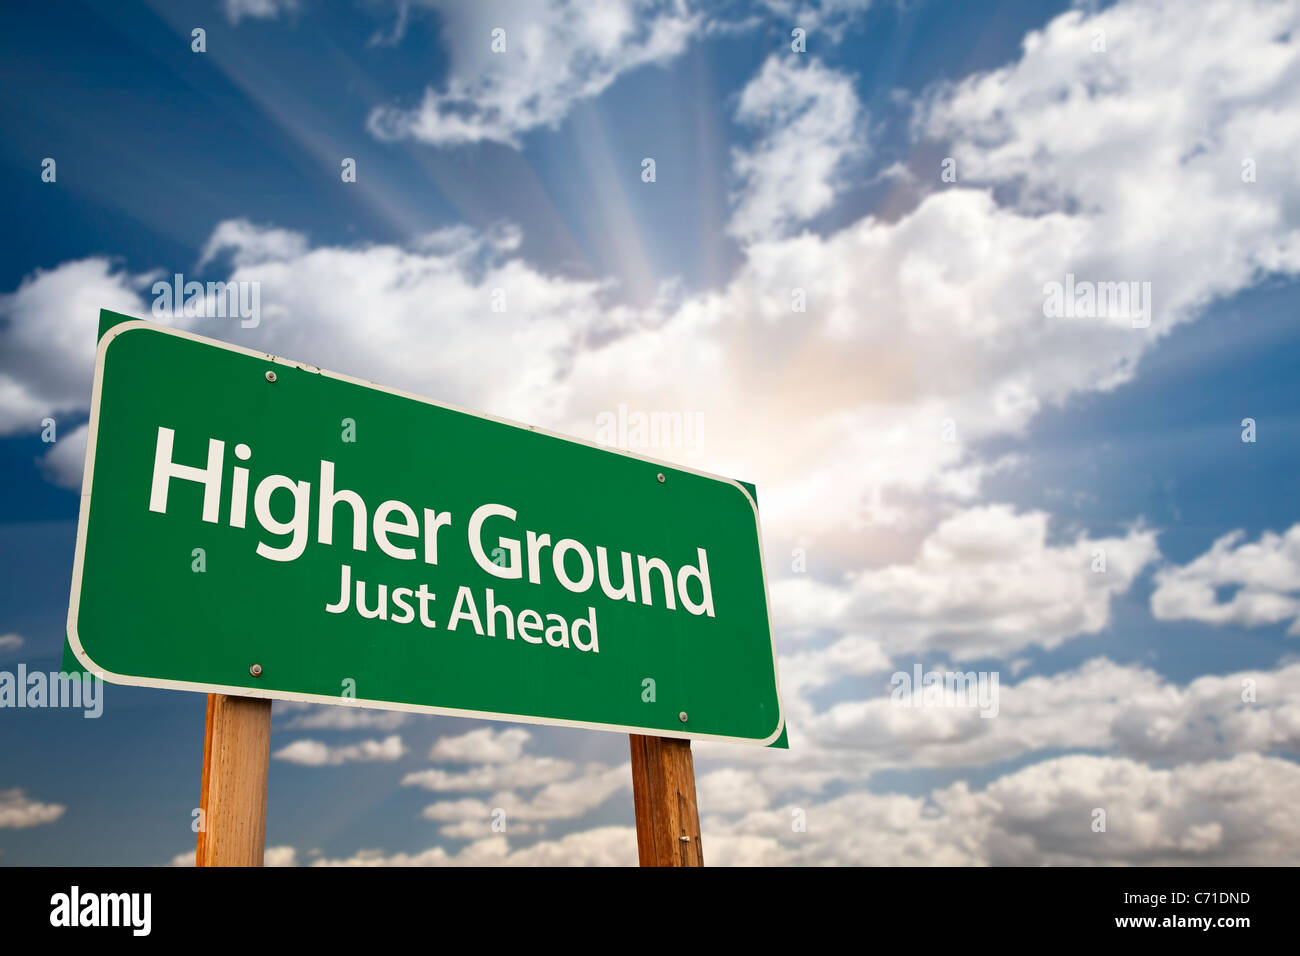 Higher Ground Green Road Sign Against Dramatic Sky, Clouds and Sunburst. Stock Photo